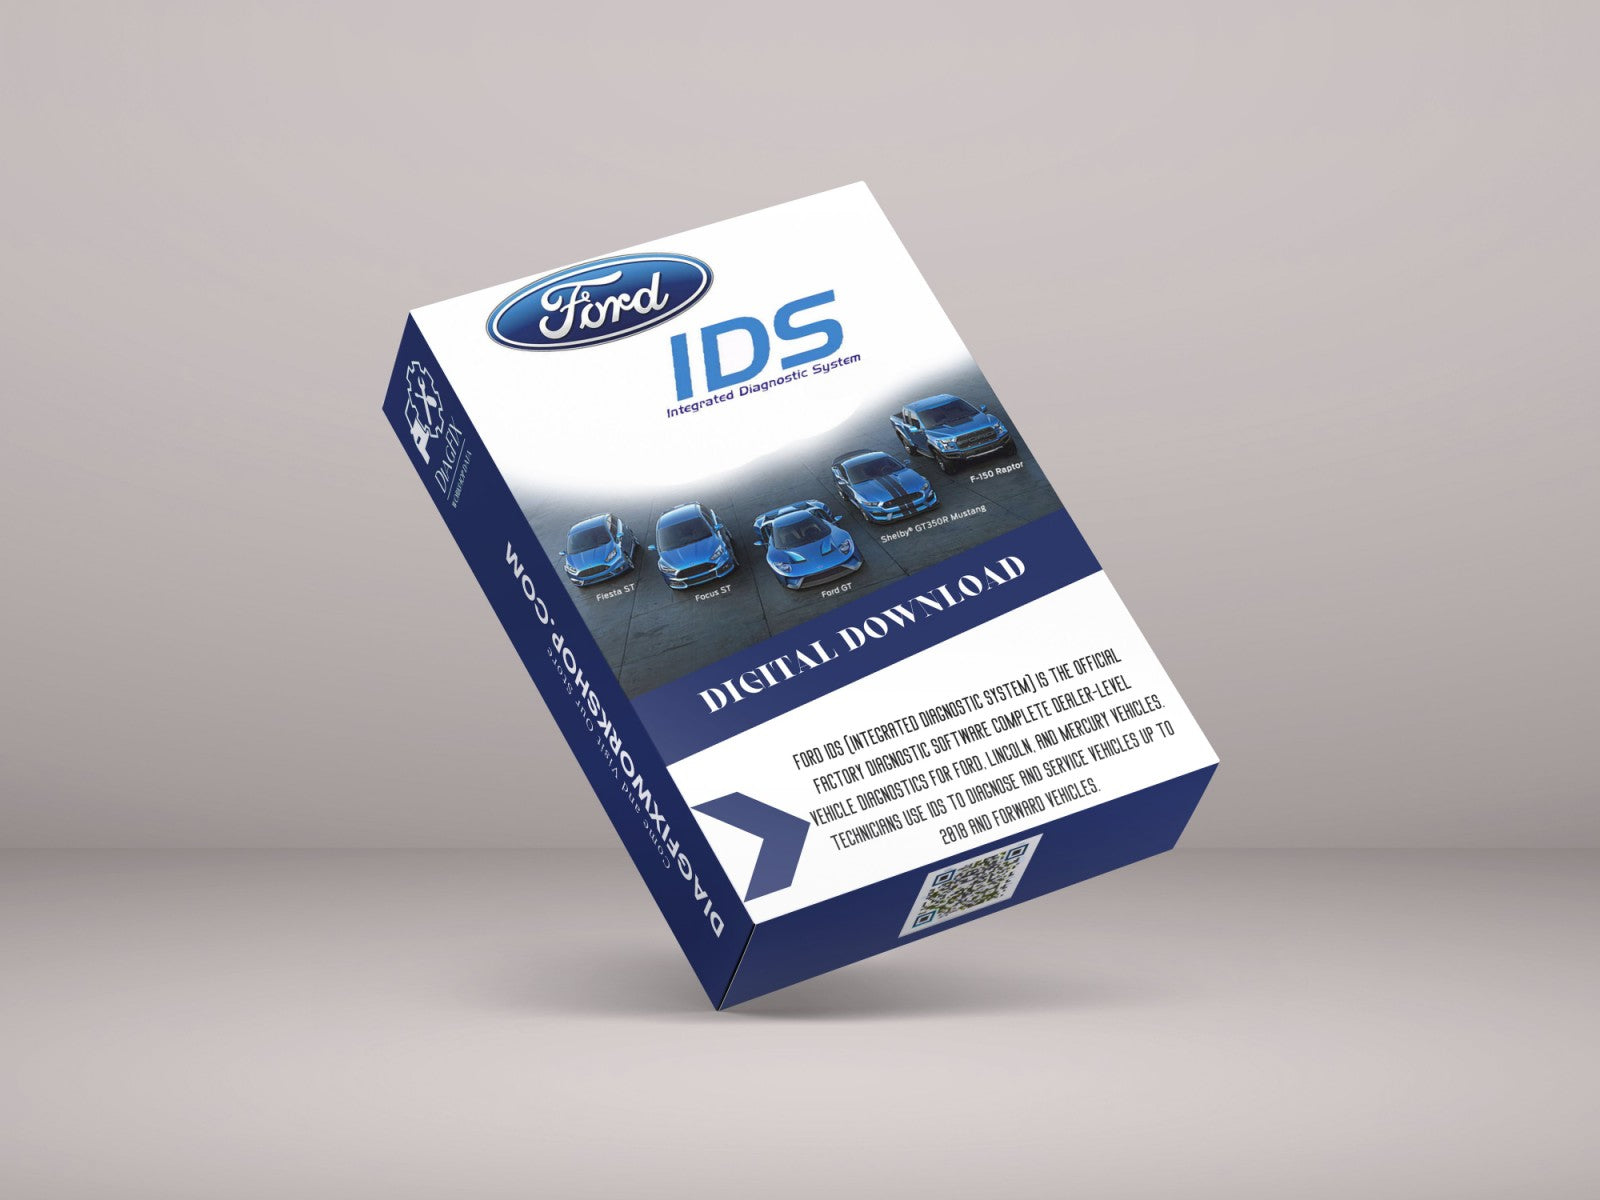 Ford IDS Software – Lifetime License